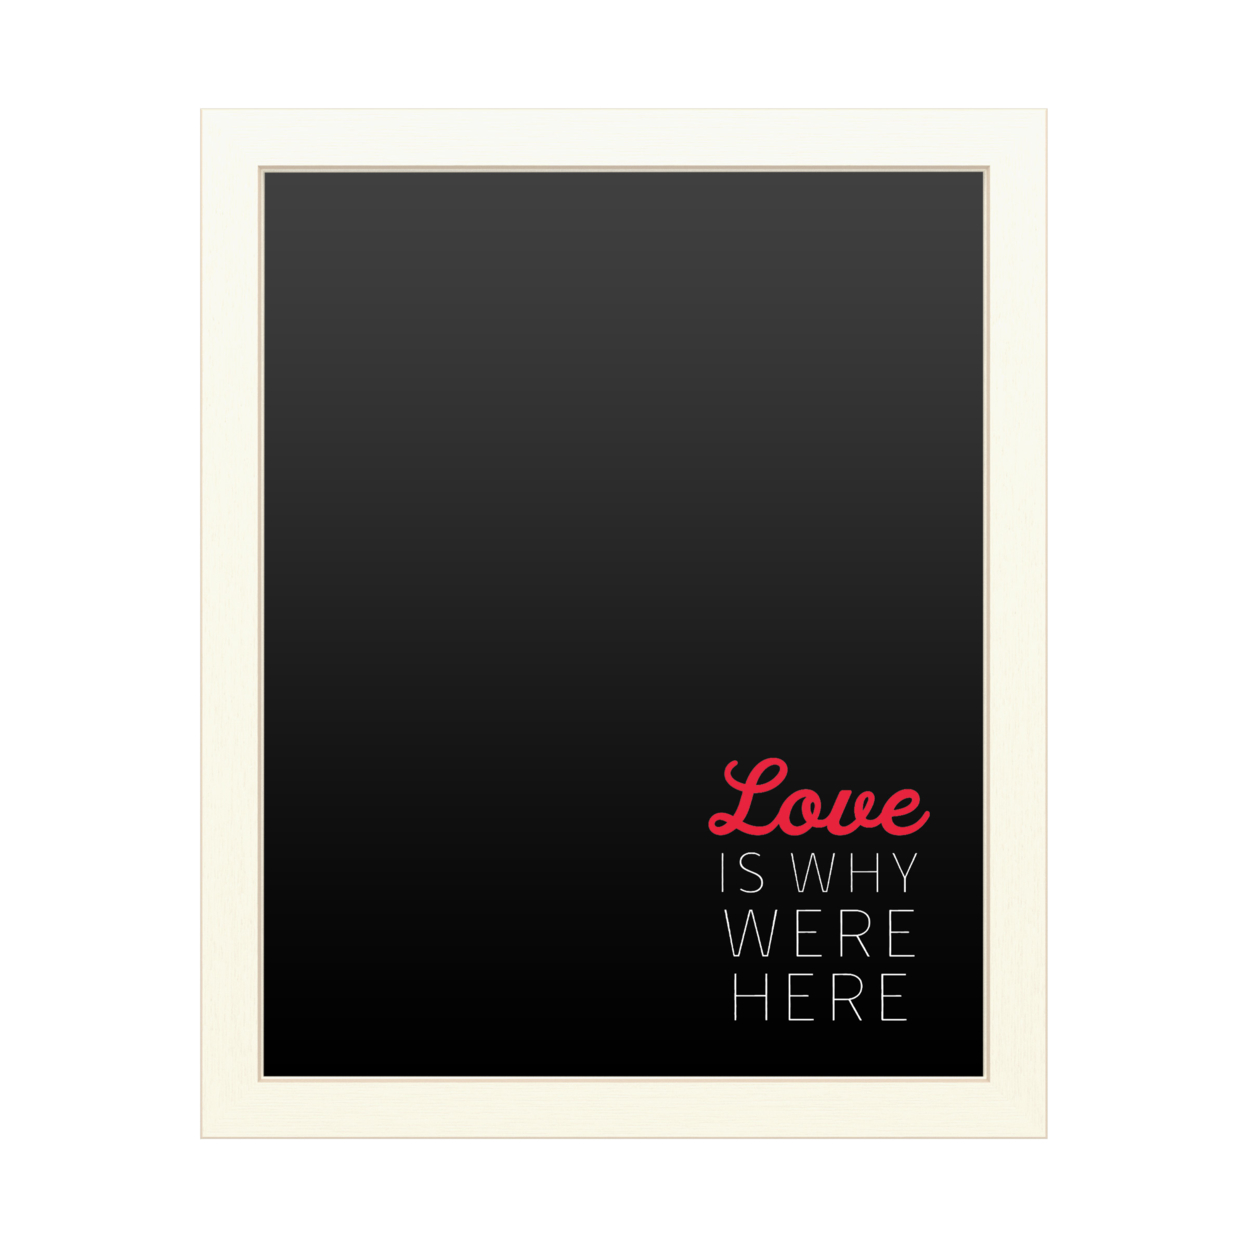 16 X 20 Chalk Board With Printed Artwork - Love Is Why Were Here White Board - Ready To Hang Chalkboard